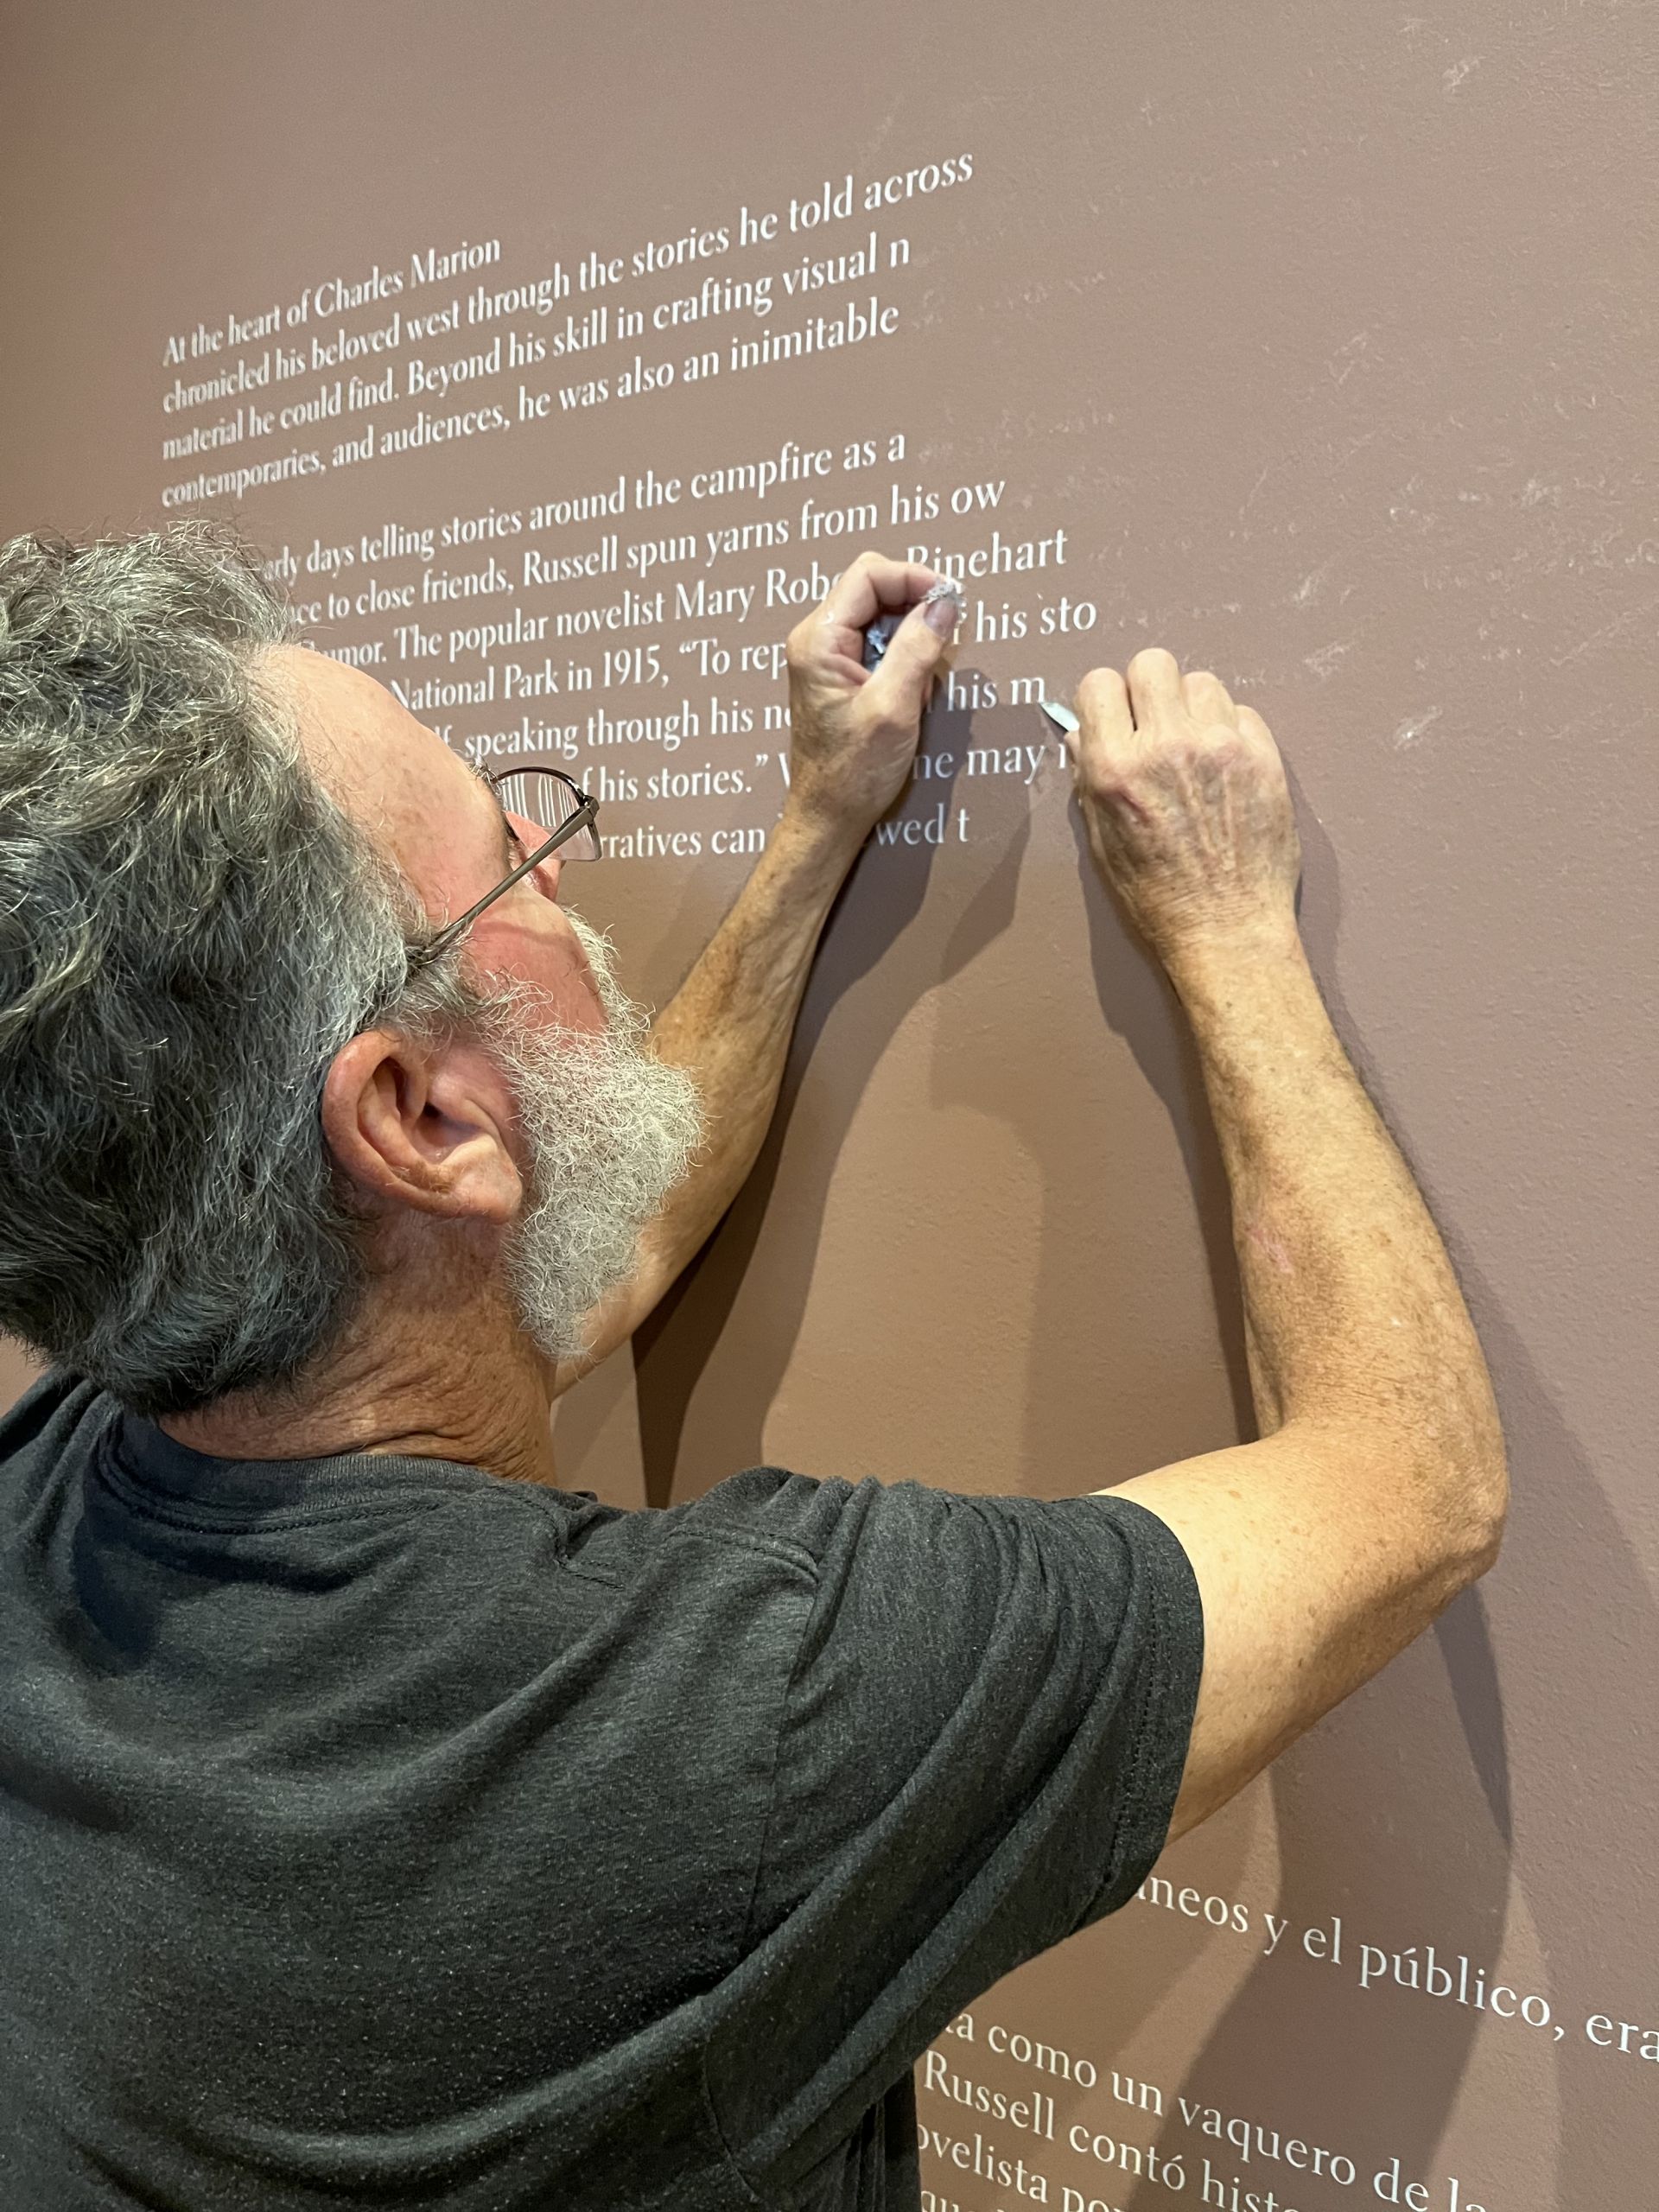 A man scraping off vinyl text from a wall.